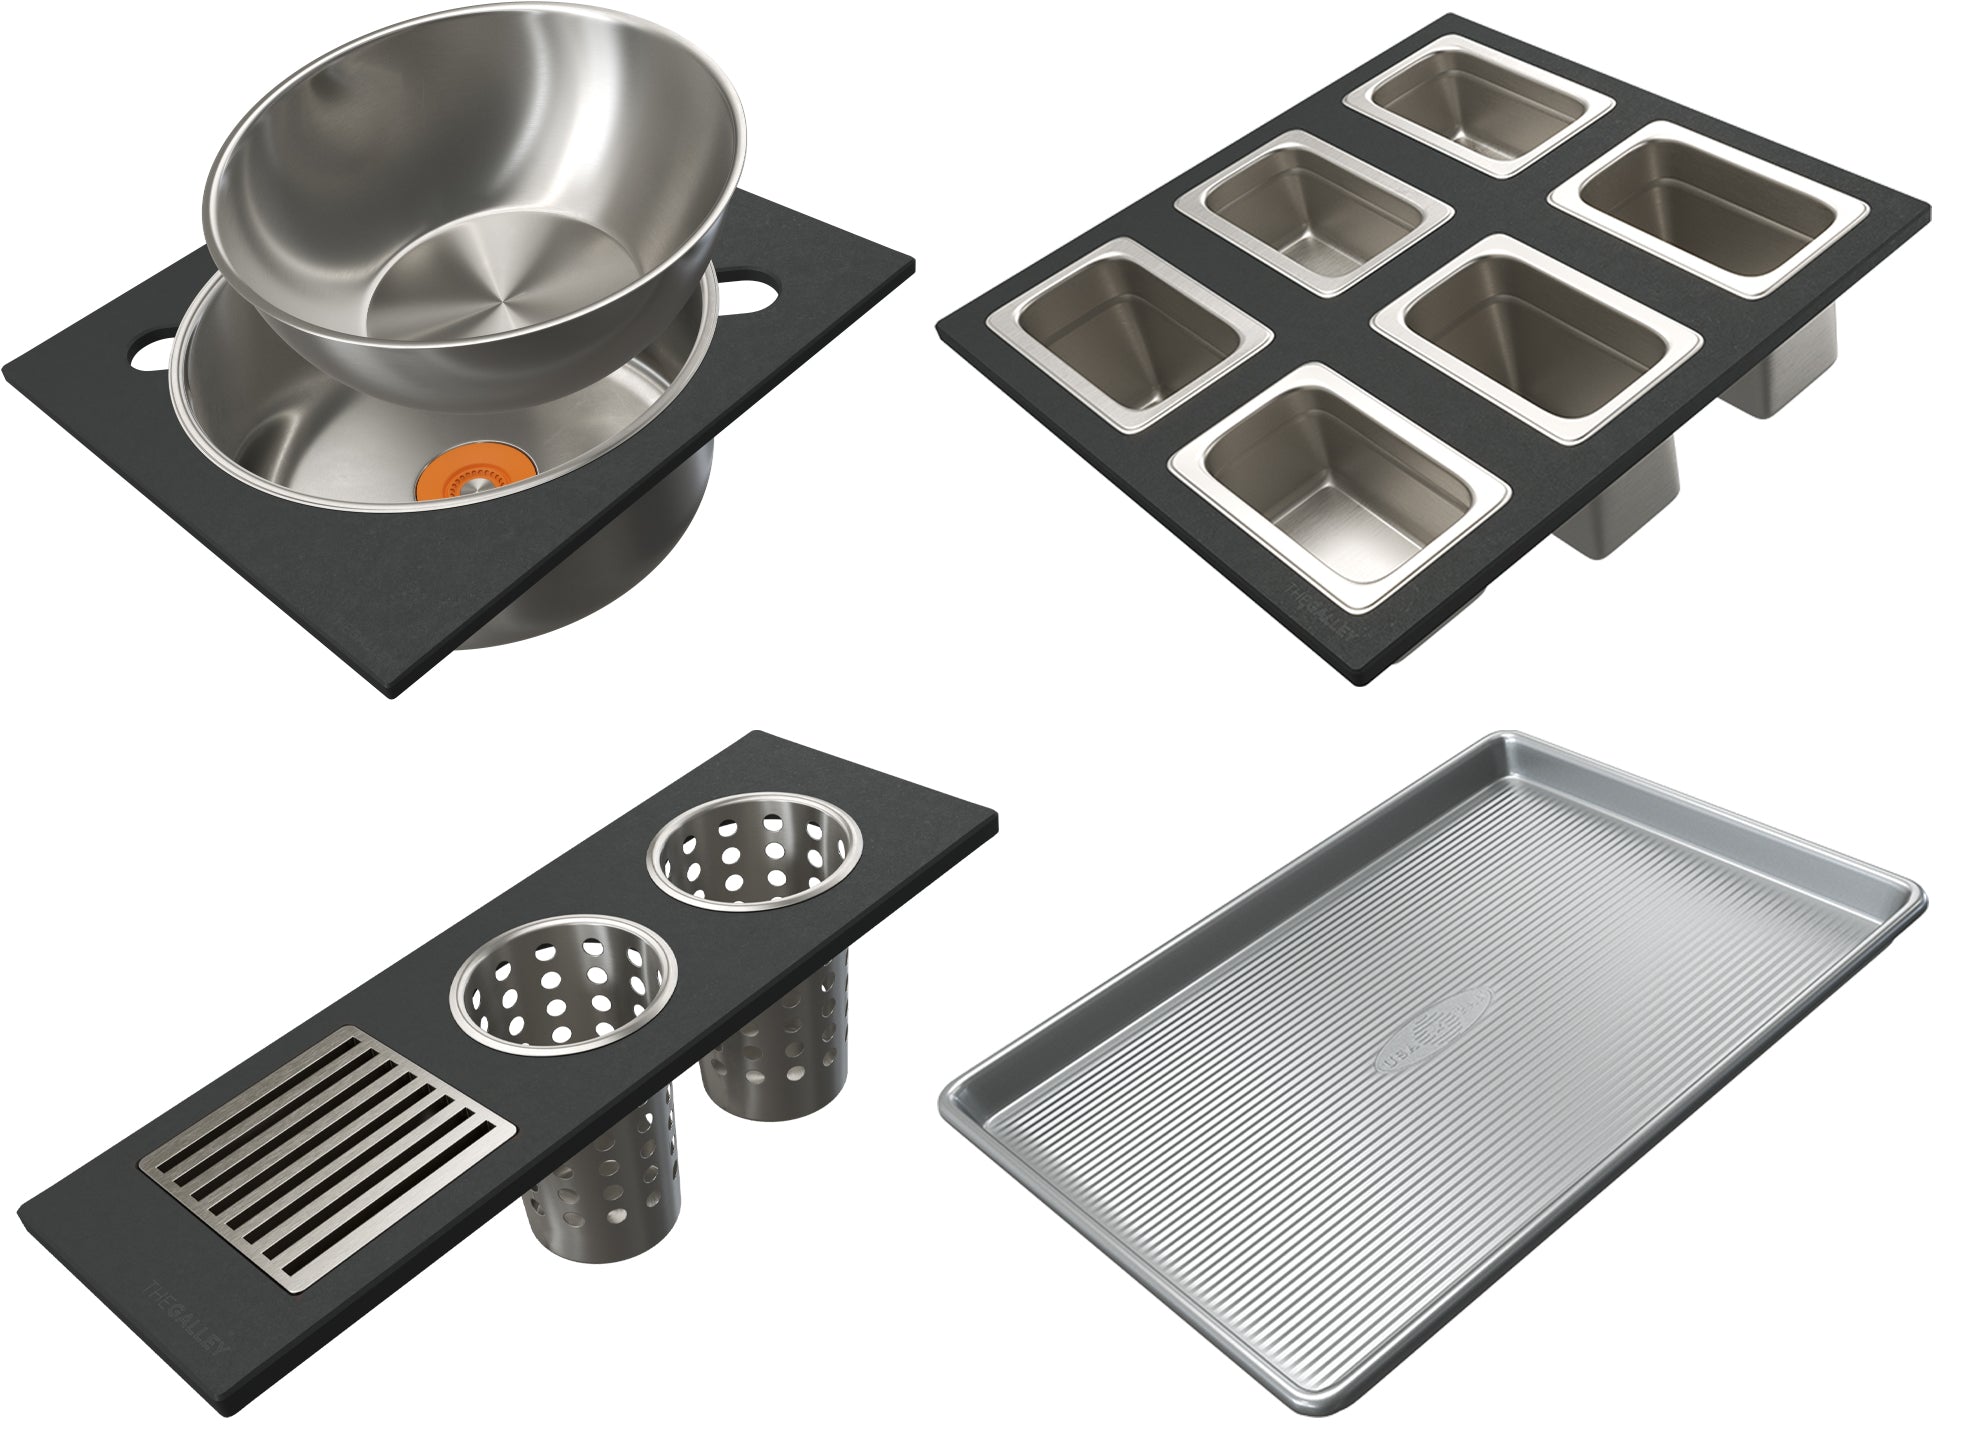 The Galley Outdoor Kit including Five Tools